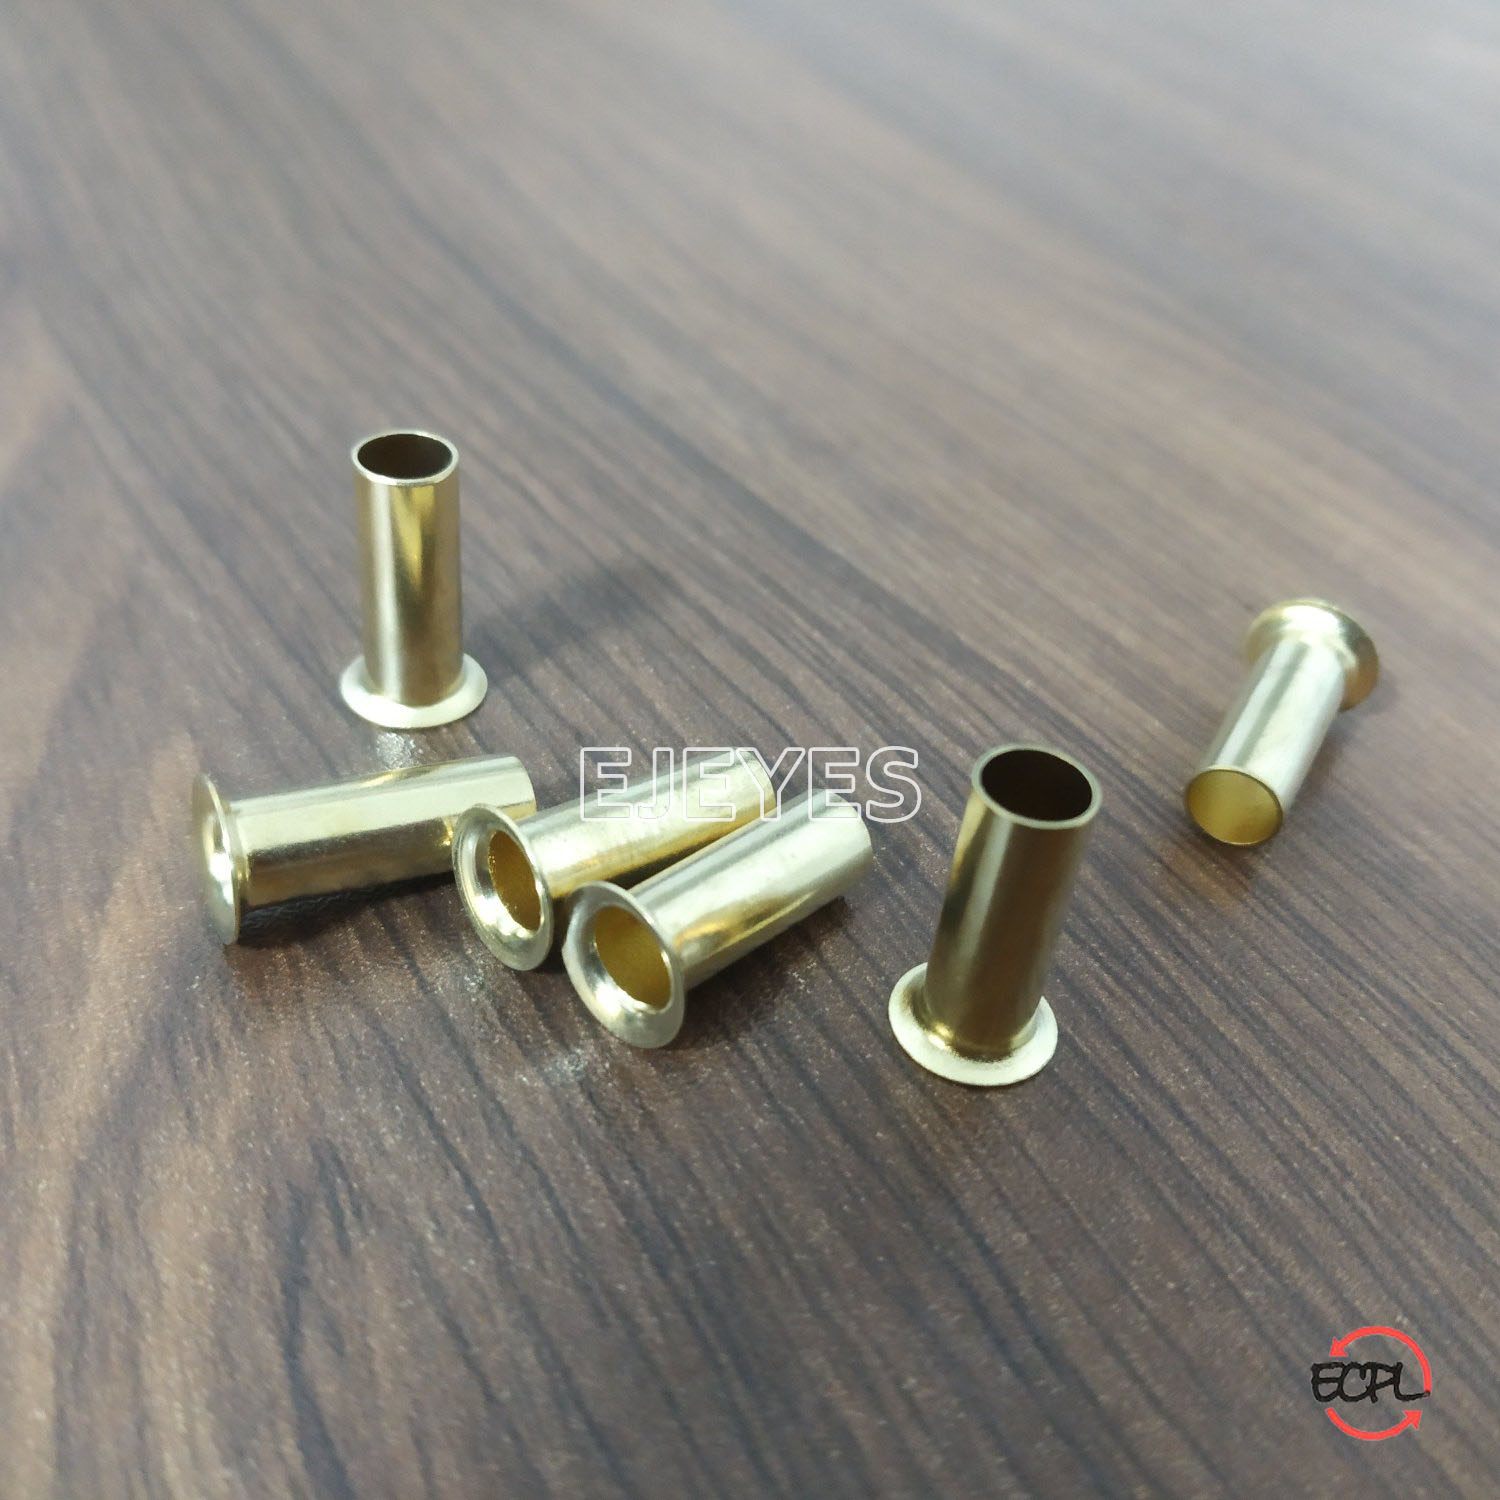 Brass tubular rivet 2157: A dependable and versatile hardware component, essential for a variety of applications.